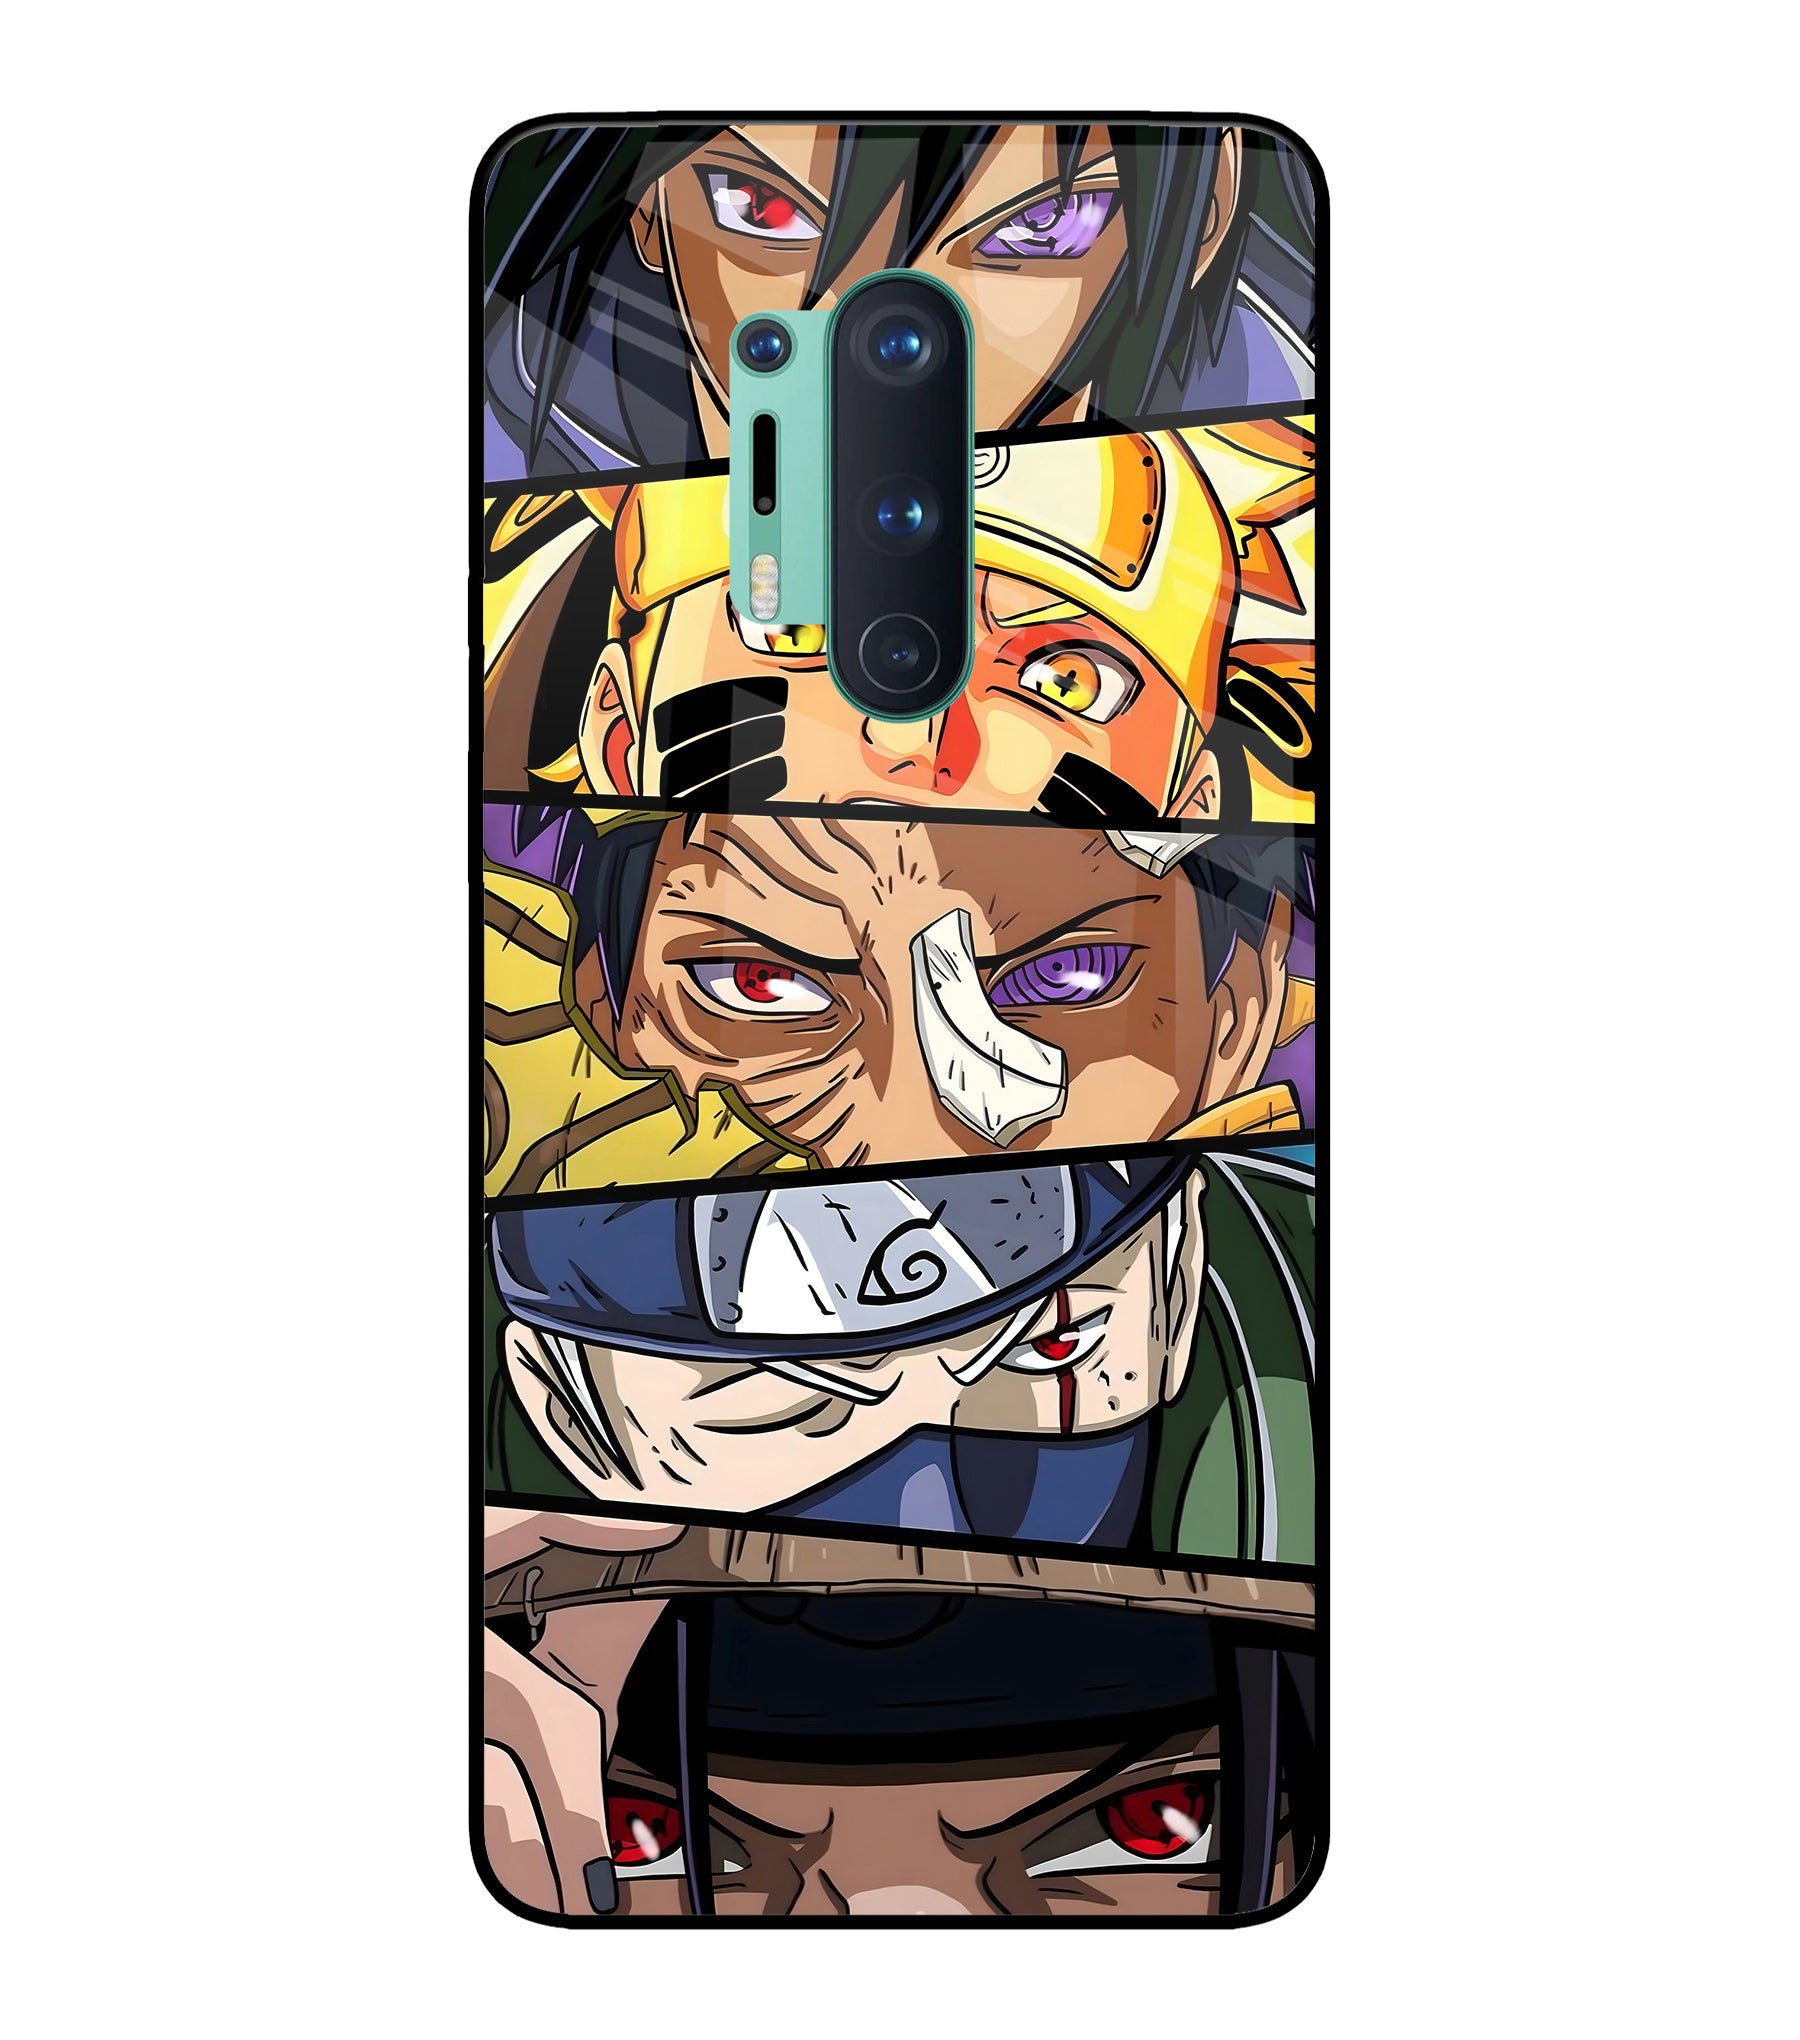 Naruto Character Oneplus 8 Pro Glass Cover